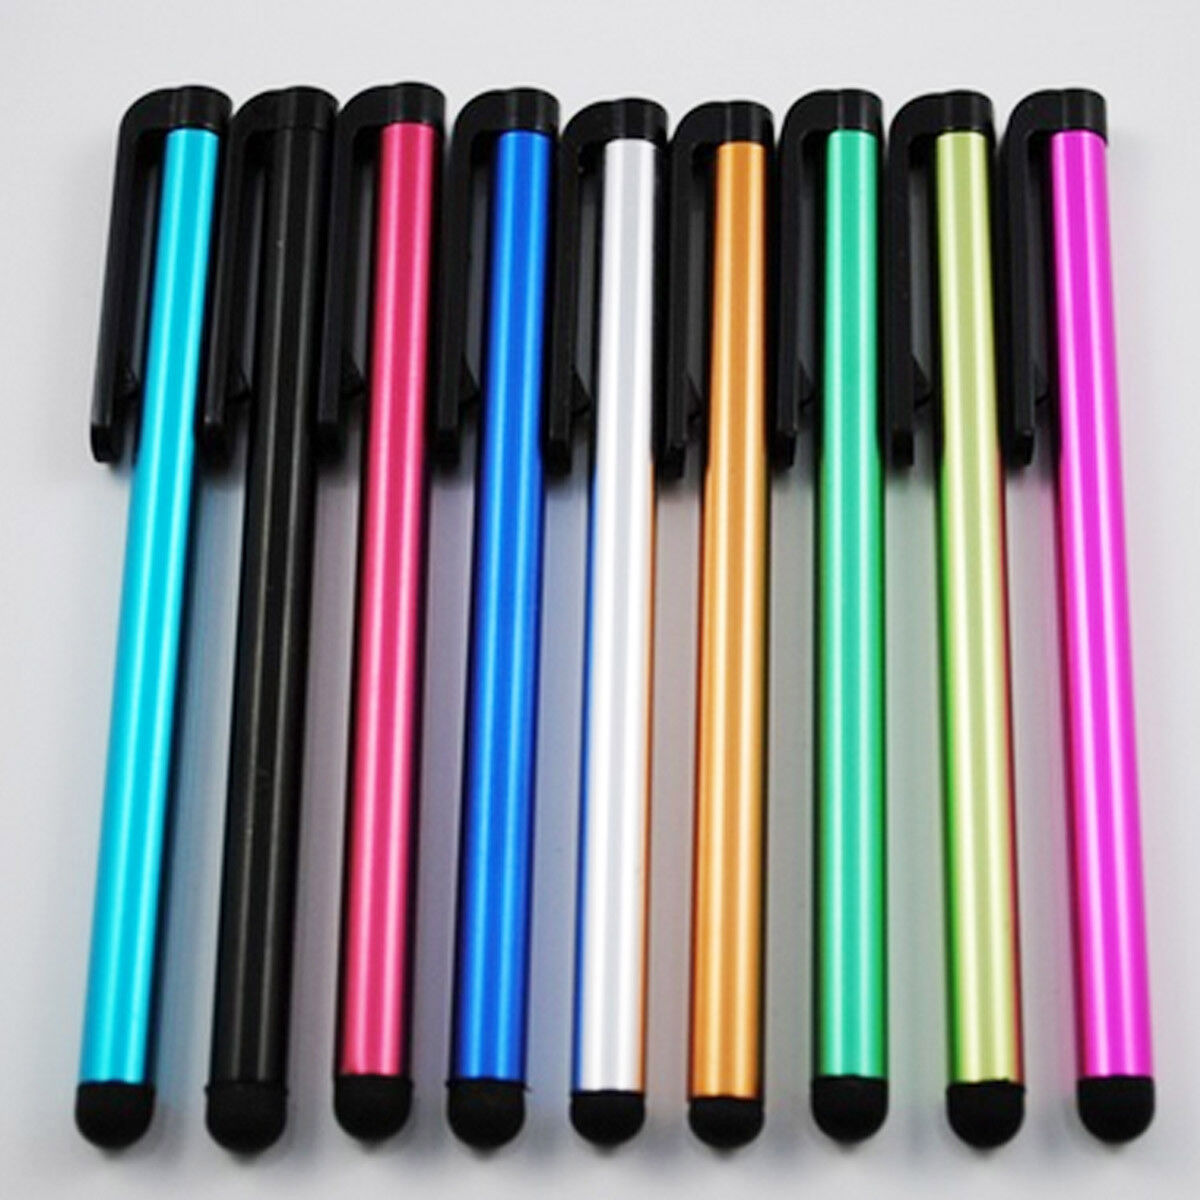 10pcs/lot Capacitive Touch Screen Stylus Pen For IPad Air Mini for iPhone Tablet